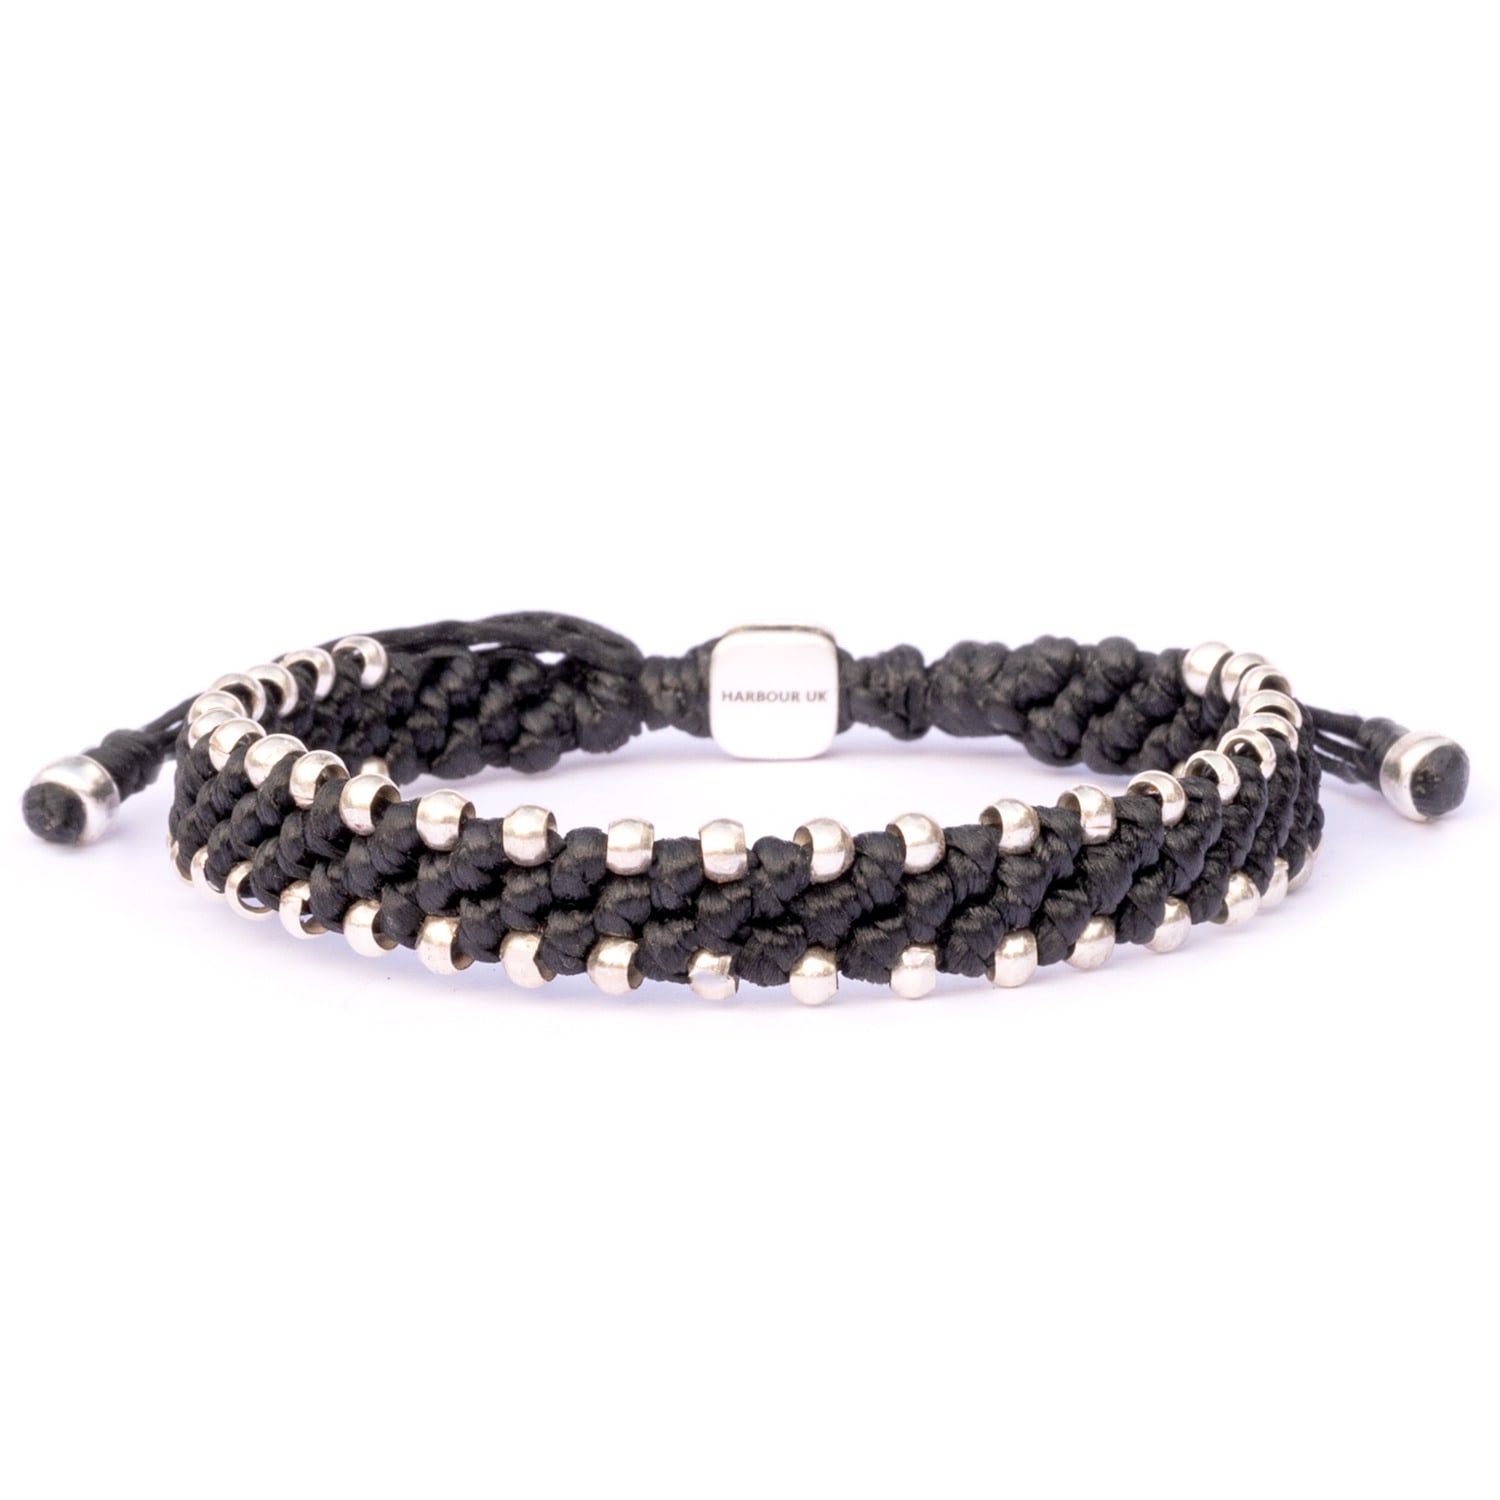 Mens Chunky Silver And Black Waterproof Rope Bracelet - Handcrafted Statement Piece For Fashionable Everyday Wear Harbour UK Bracelets